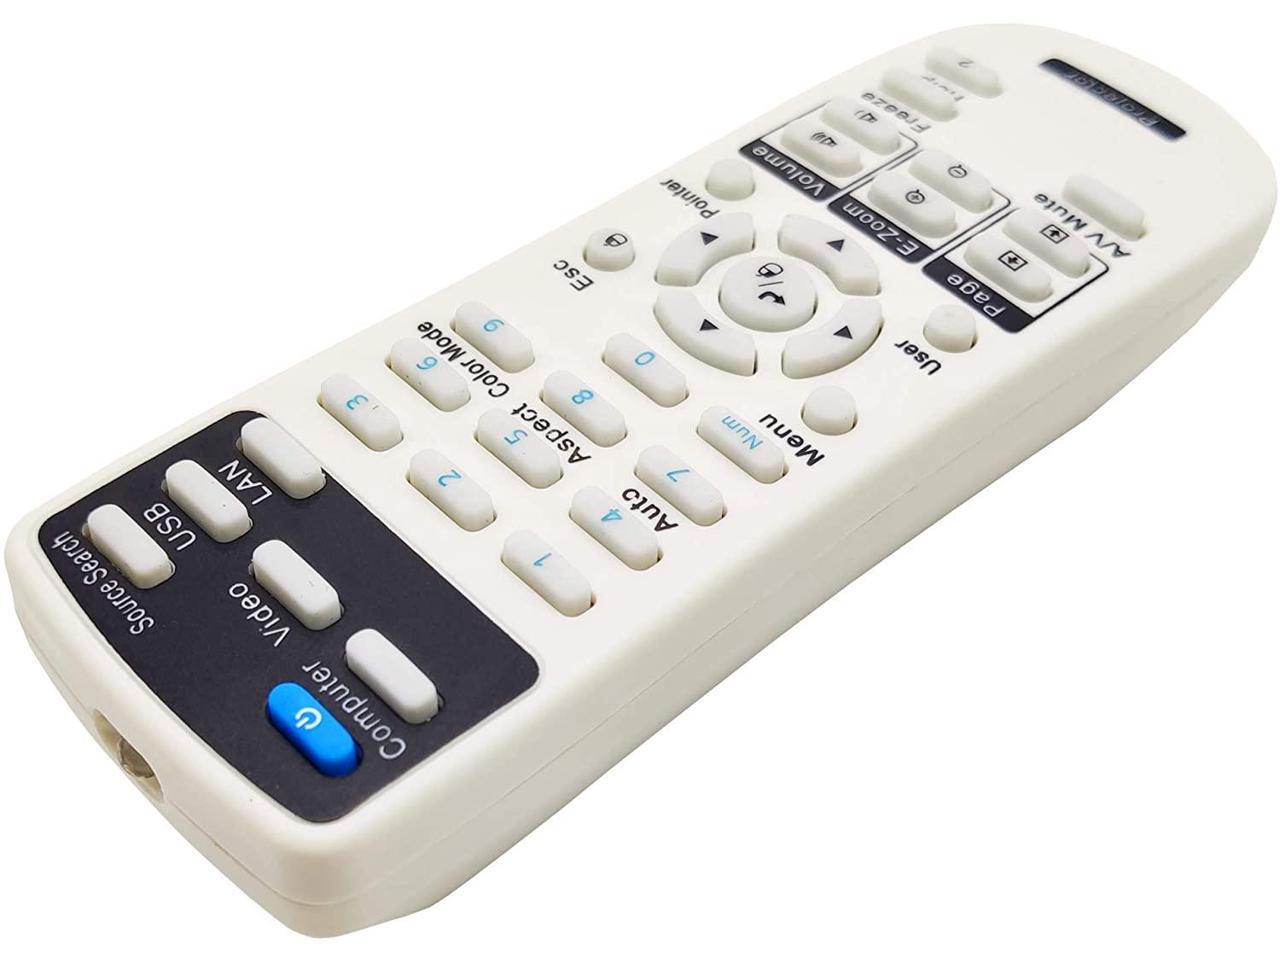 CLOB Projector Remote Control for EPSON Projector EX7210. 